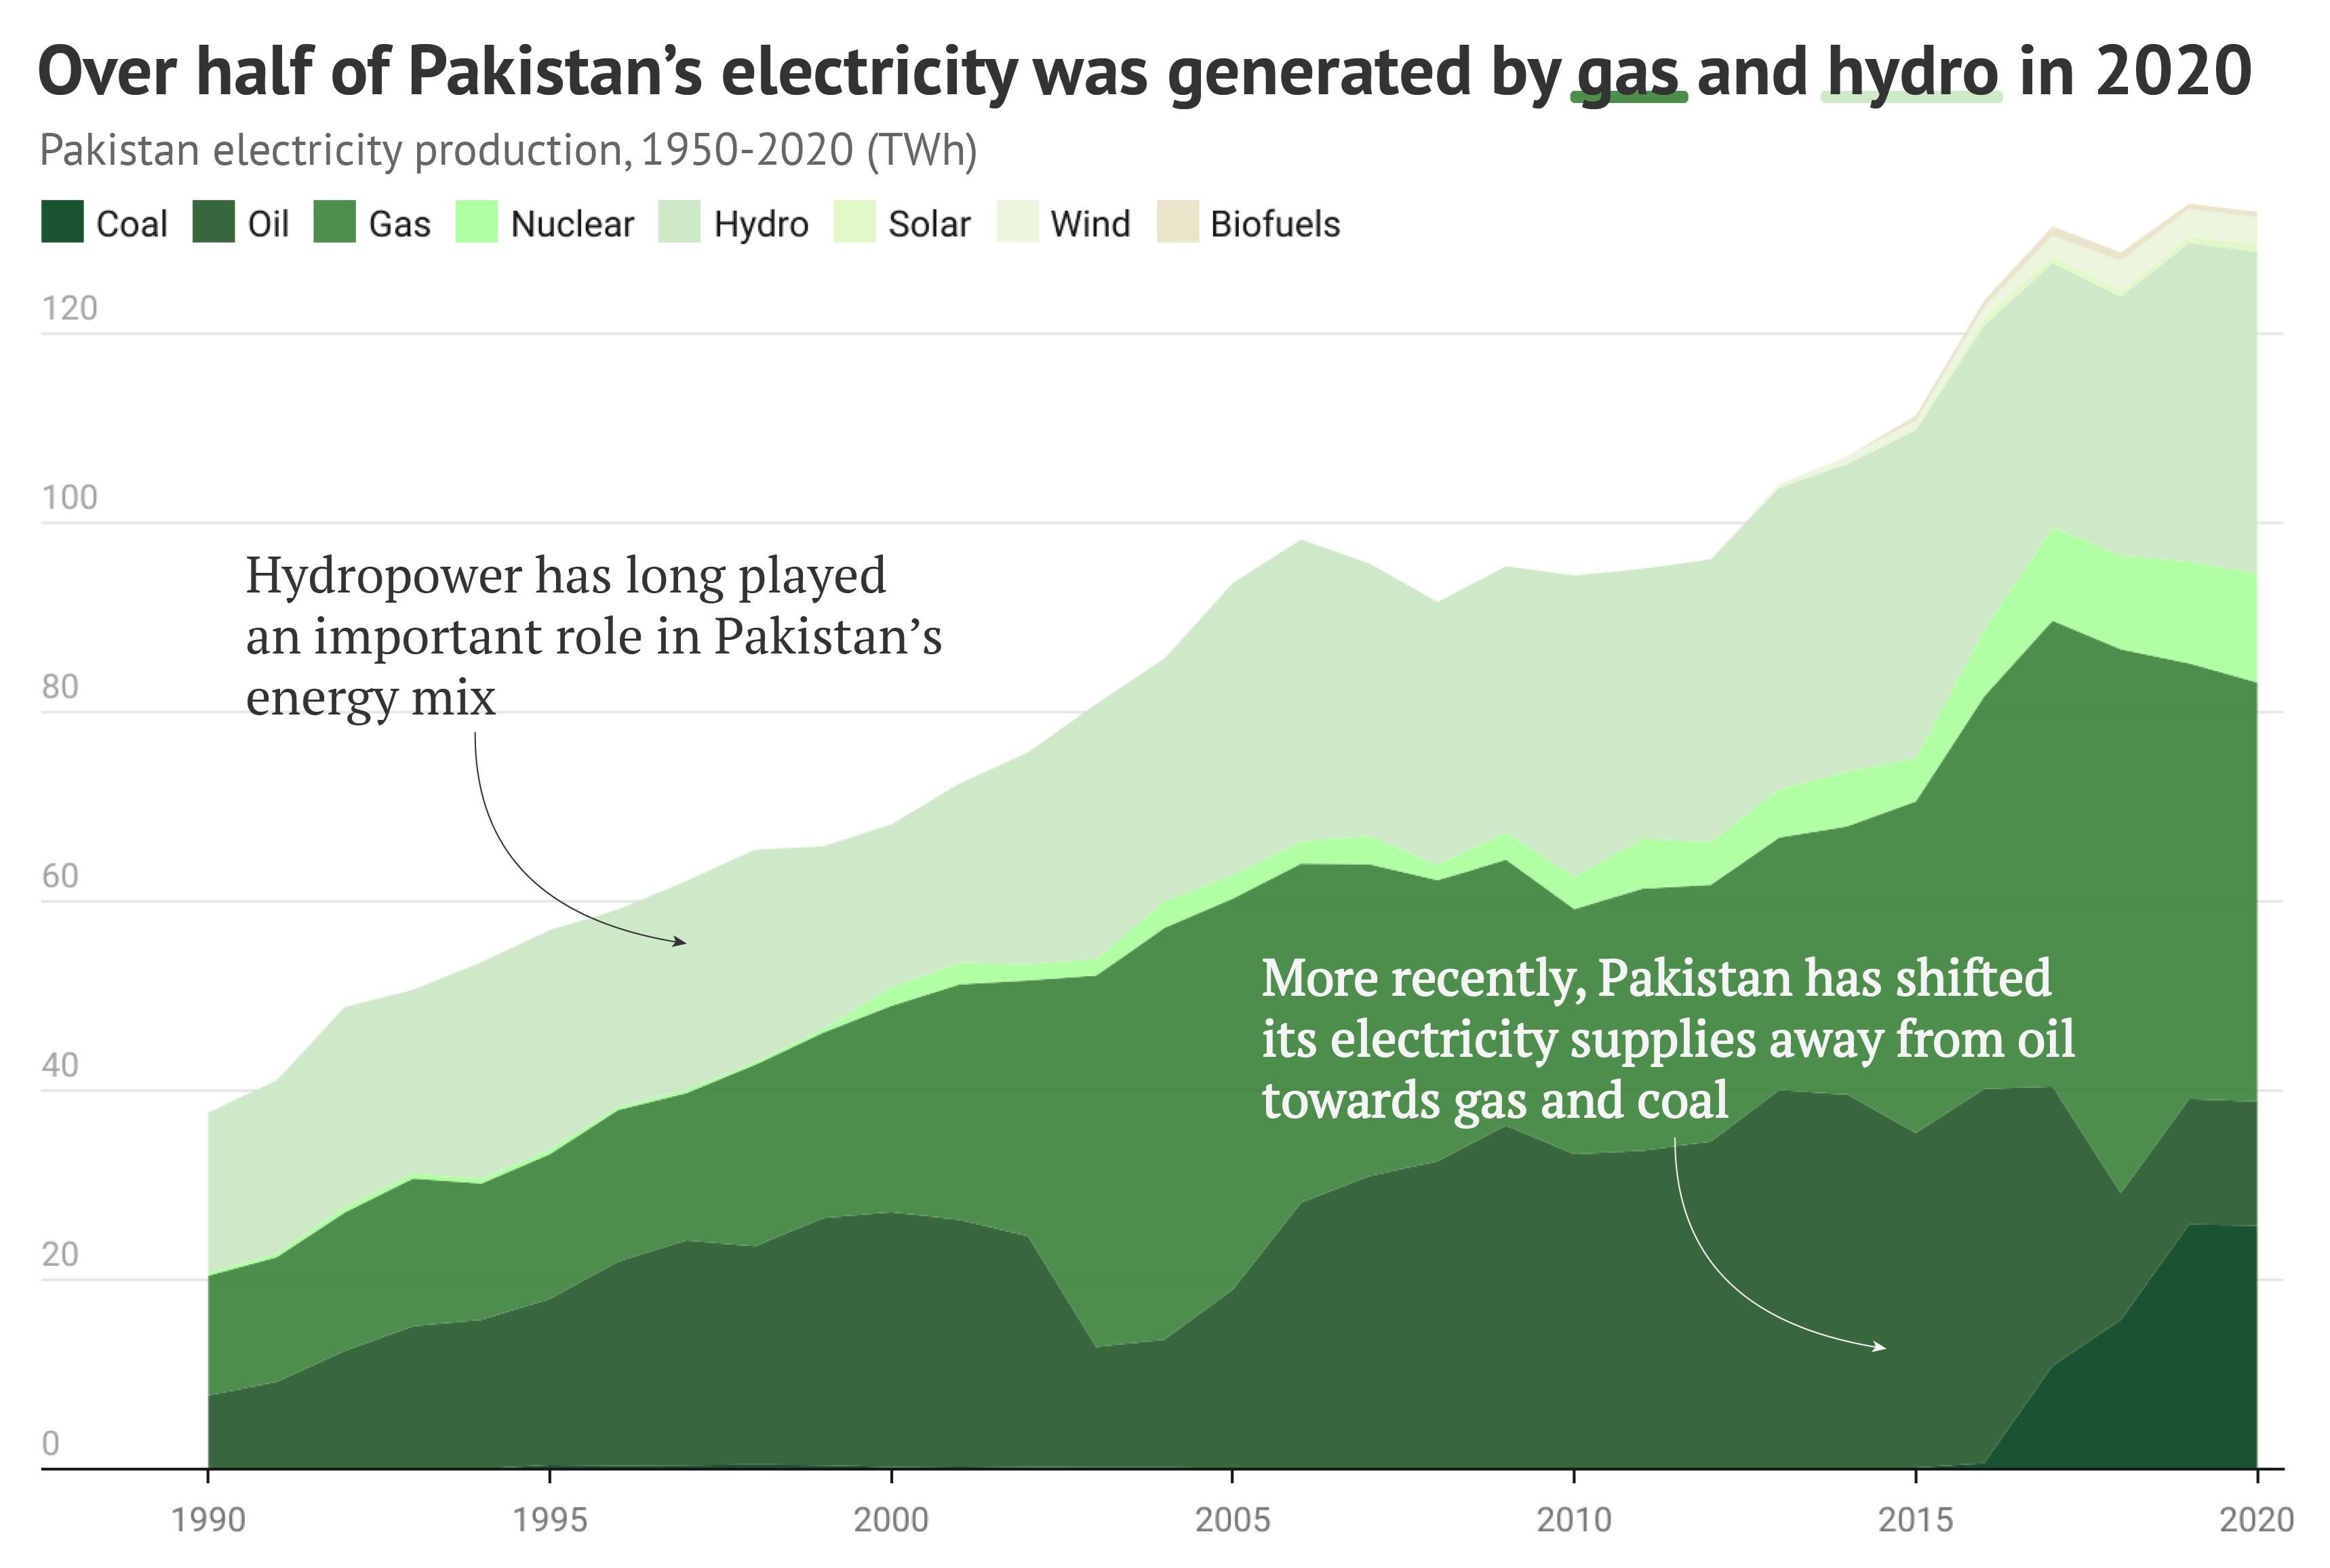 Chart showing that over half of Pakistan's electricity was generated by gas and hydro in 2020.